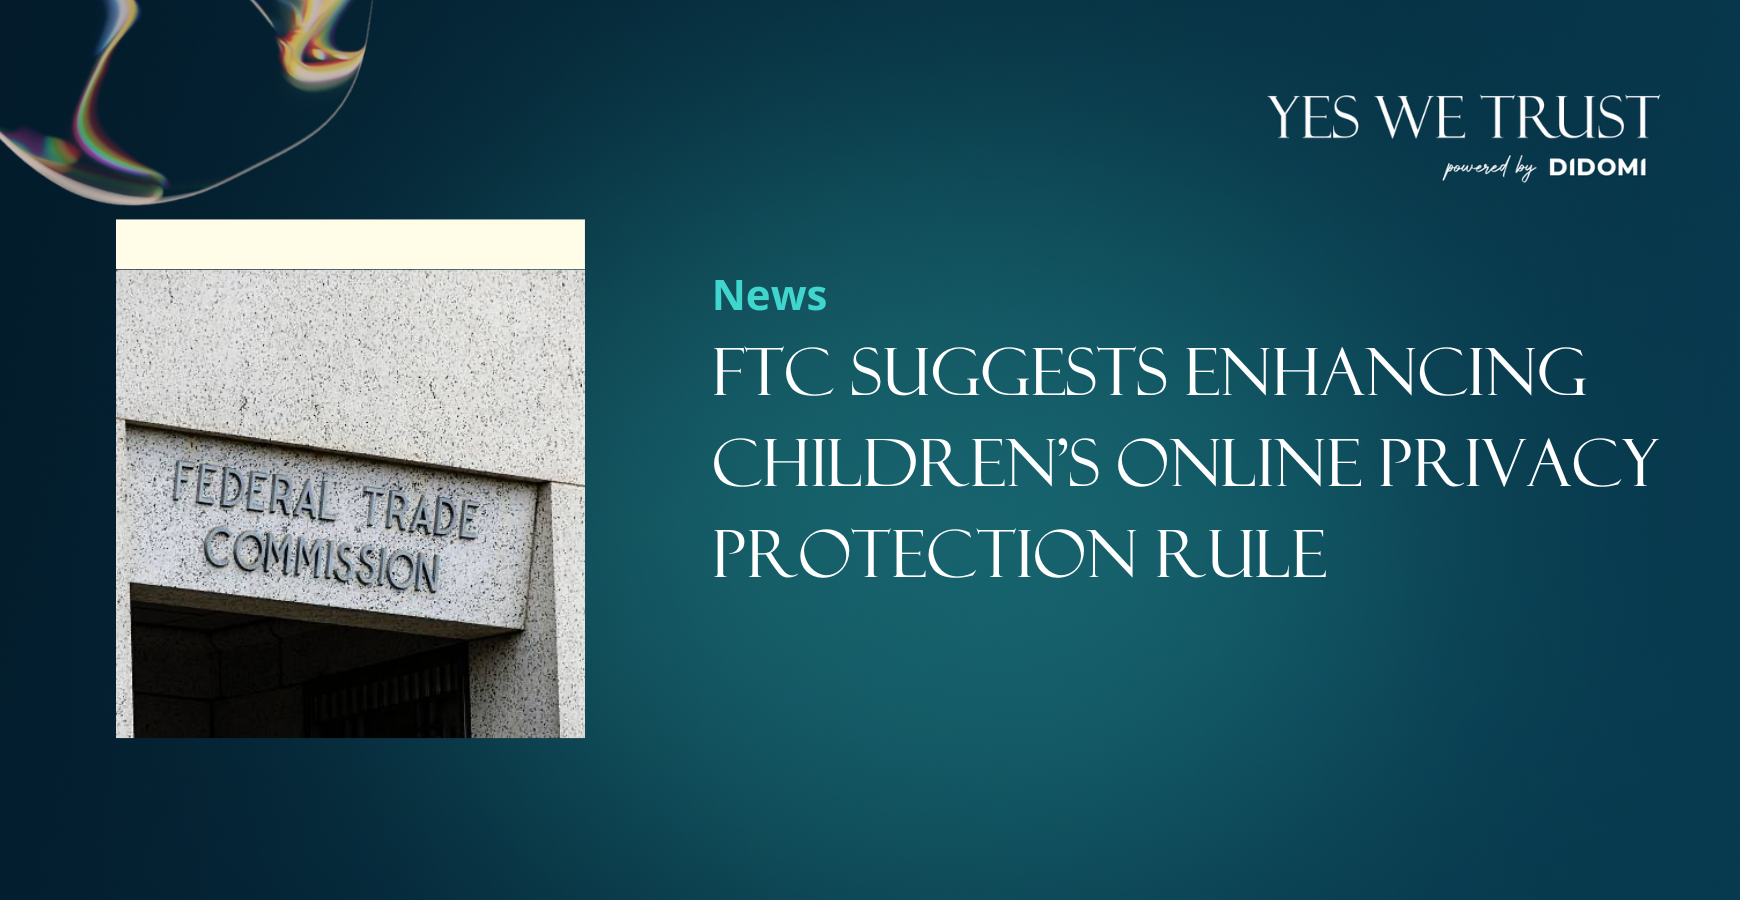 FTC suggests enhancing Children’s Online Privacy Protection Rule